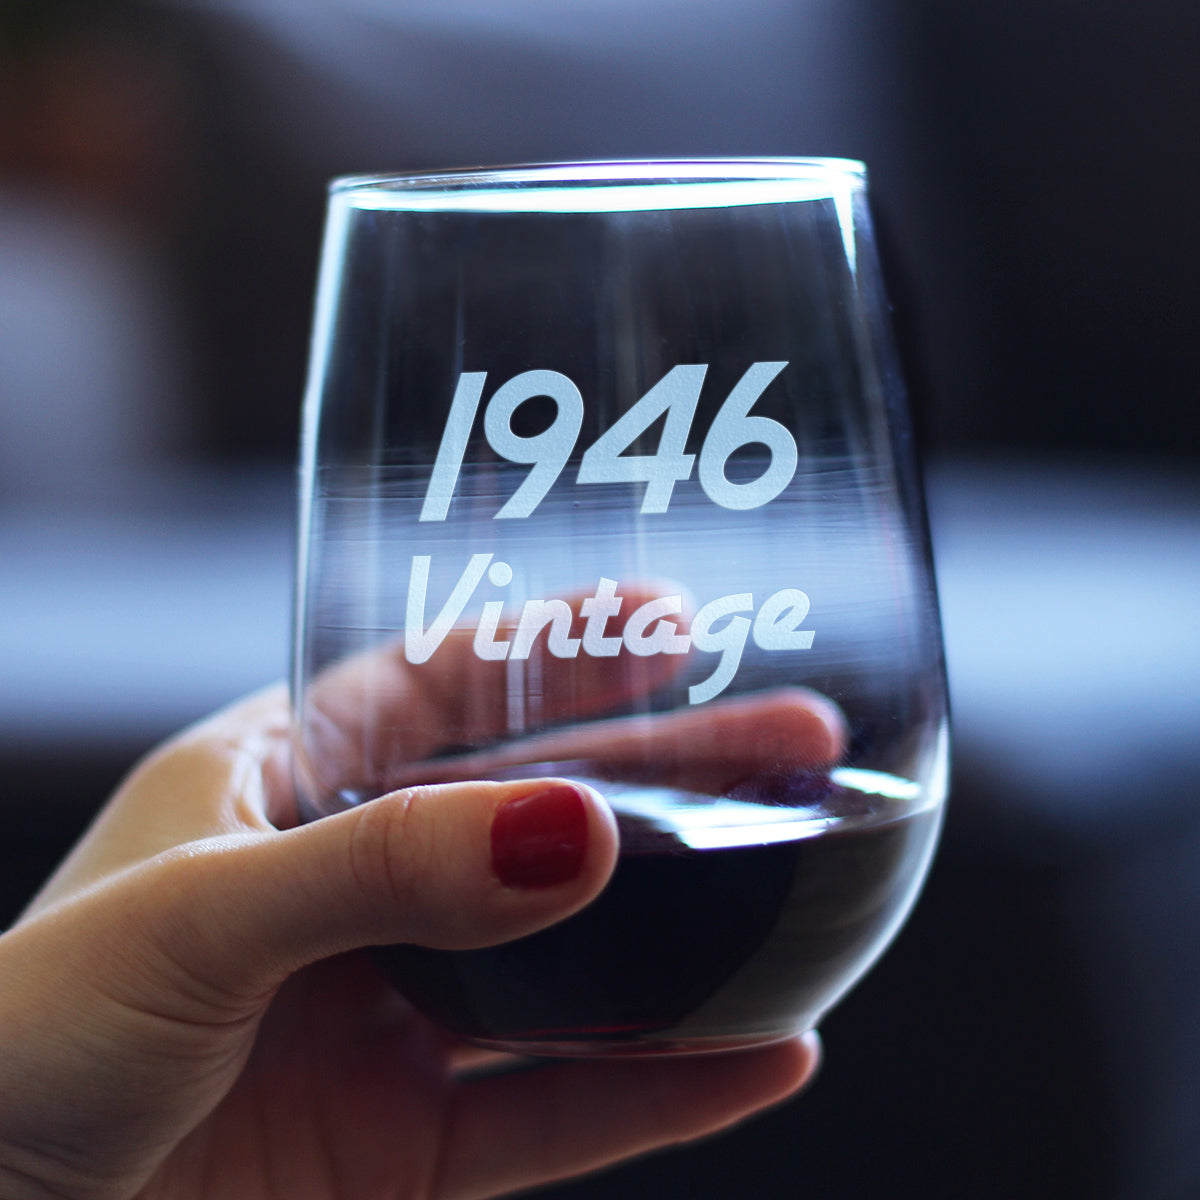 Vintage 1946 - 78th Birthday Stemless Wine Glass Gifts for Women &amp; Men Turning 78 - Bday Party Decor - Large Glasses